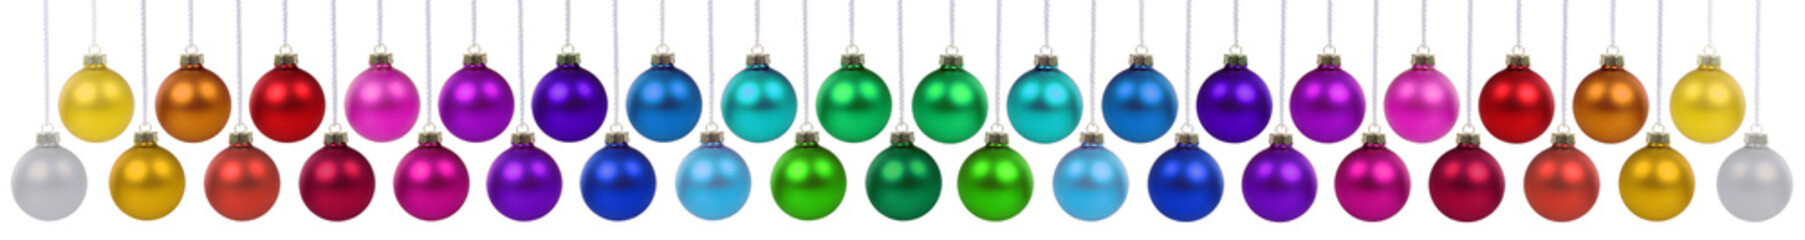 Christmas balls many baubles banner with colorful colors decoration hanging isolated on white